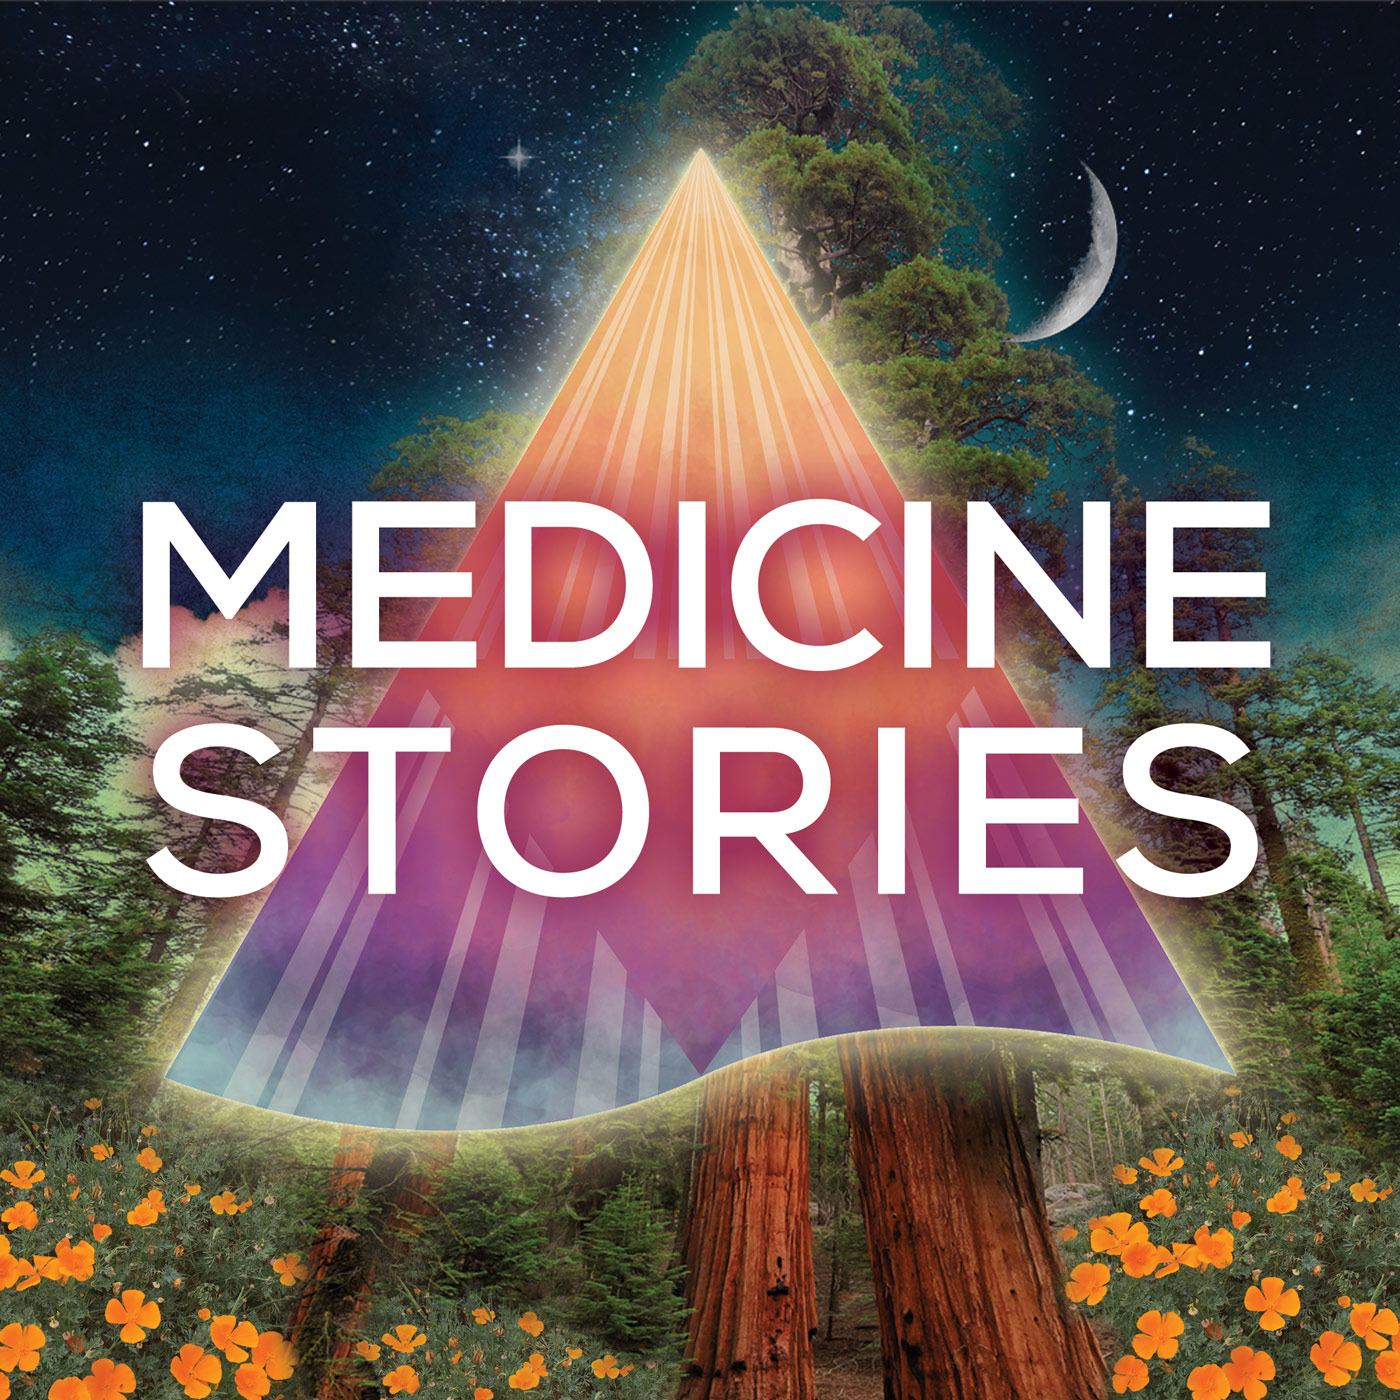 13. Psychedelic Healing: From Microdosing to Transcendence - Jim Fadiman